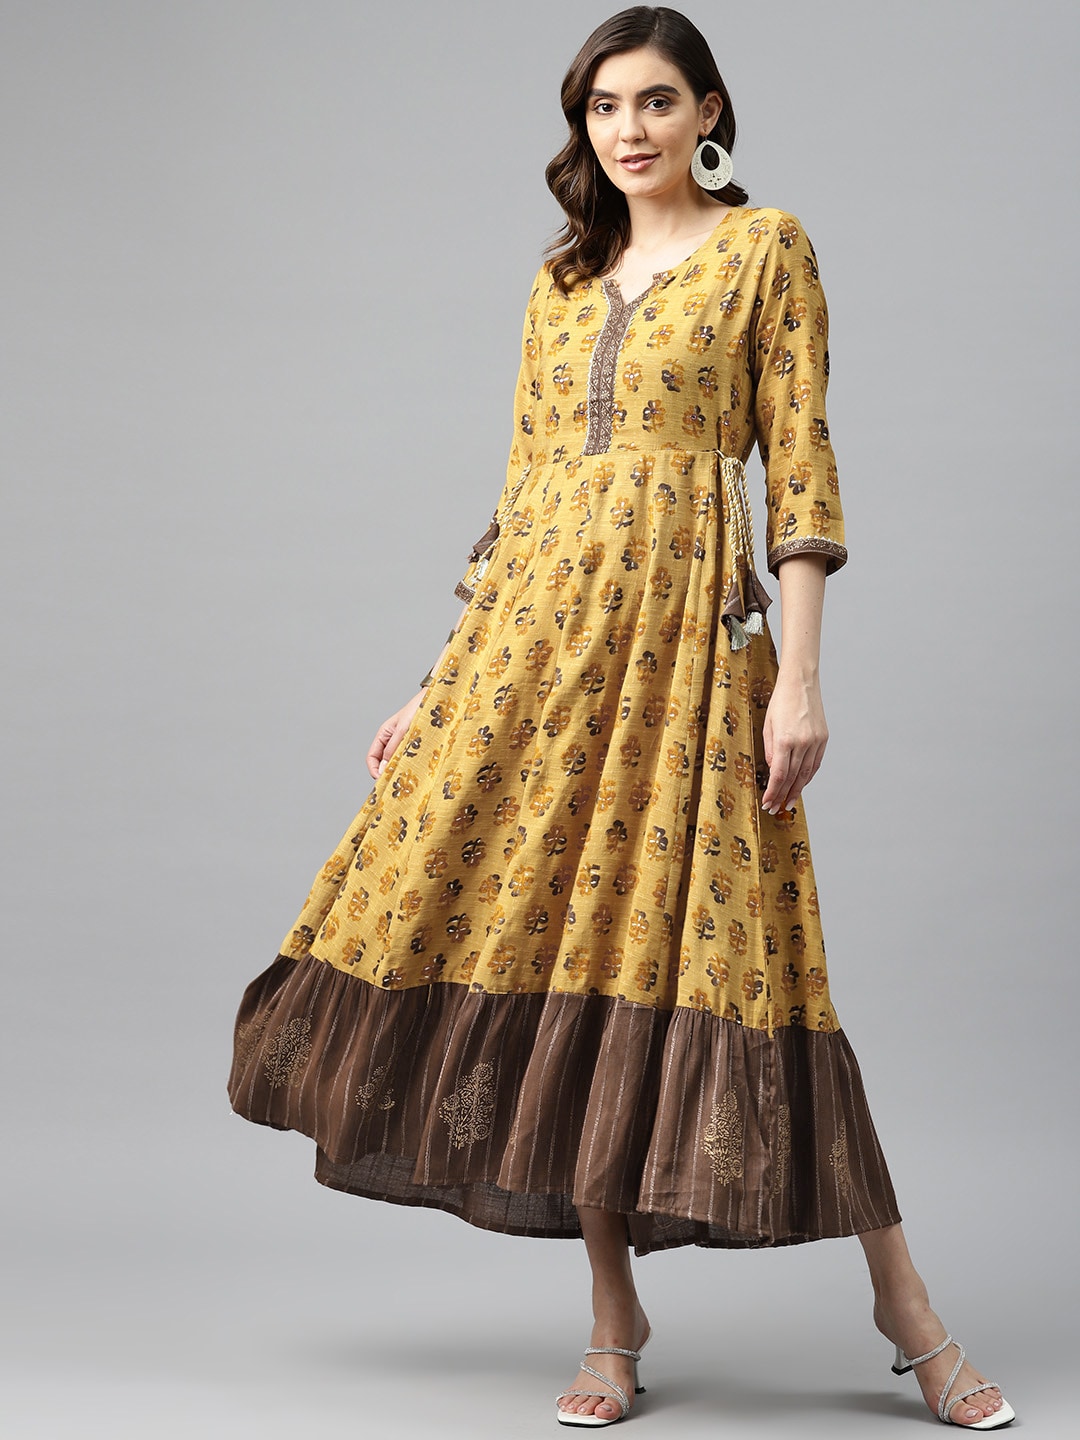 Readiprint Fashions Floral Print Fit & Flare Midi Ethnic Style Dress Price in India